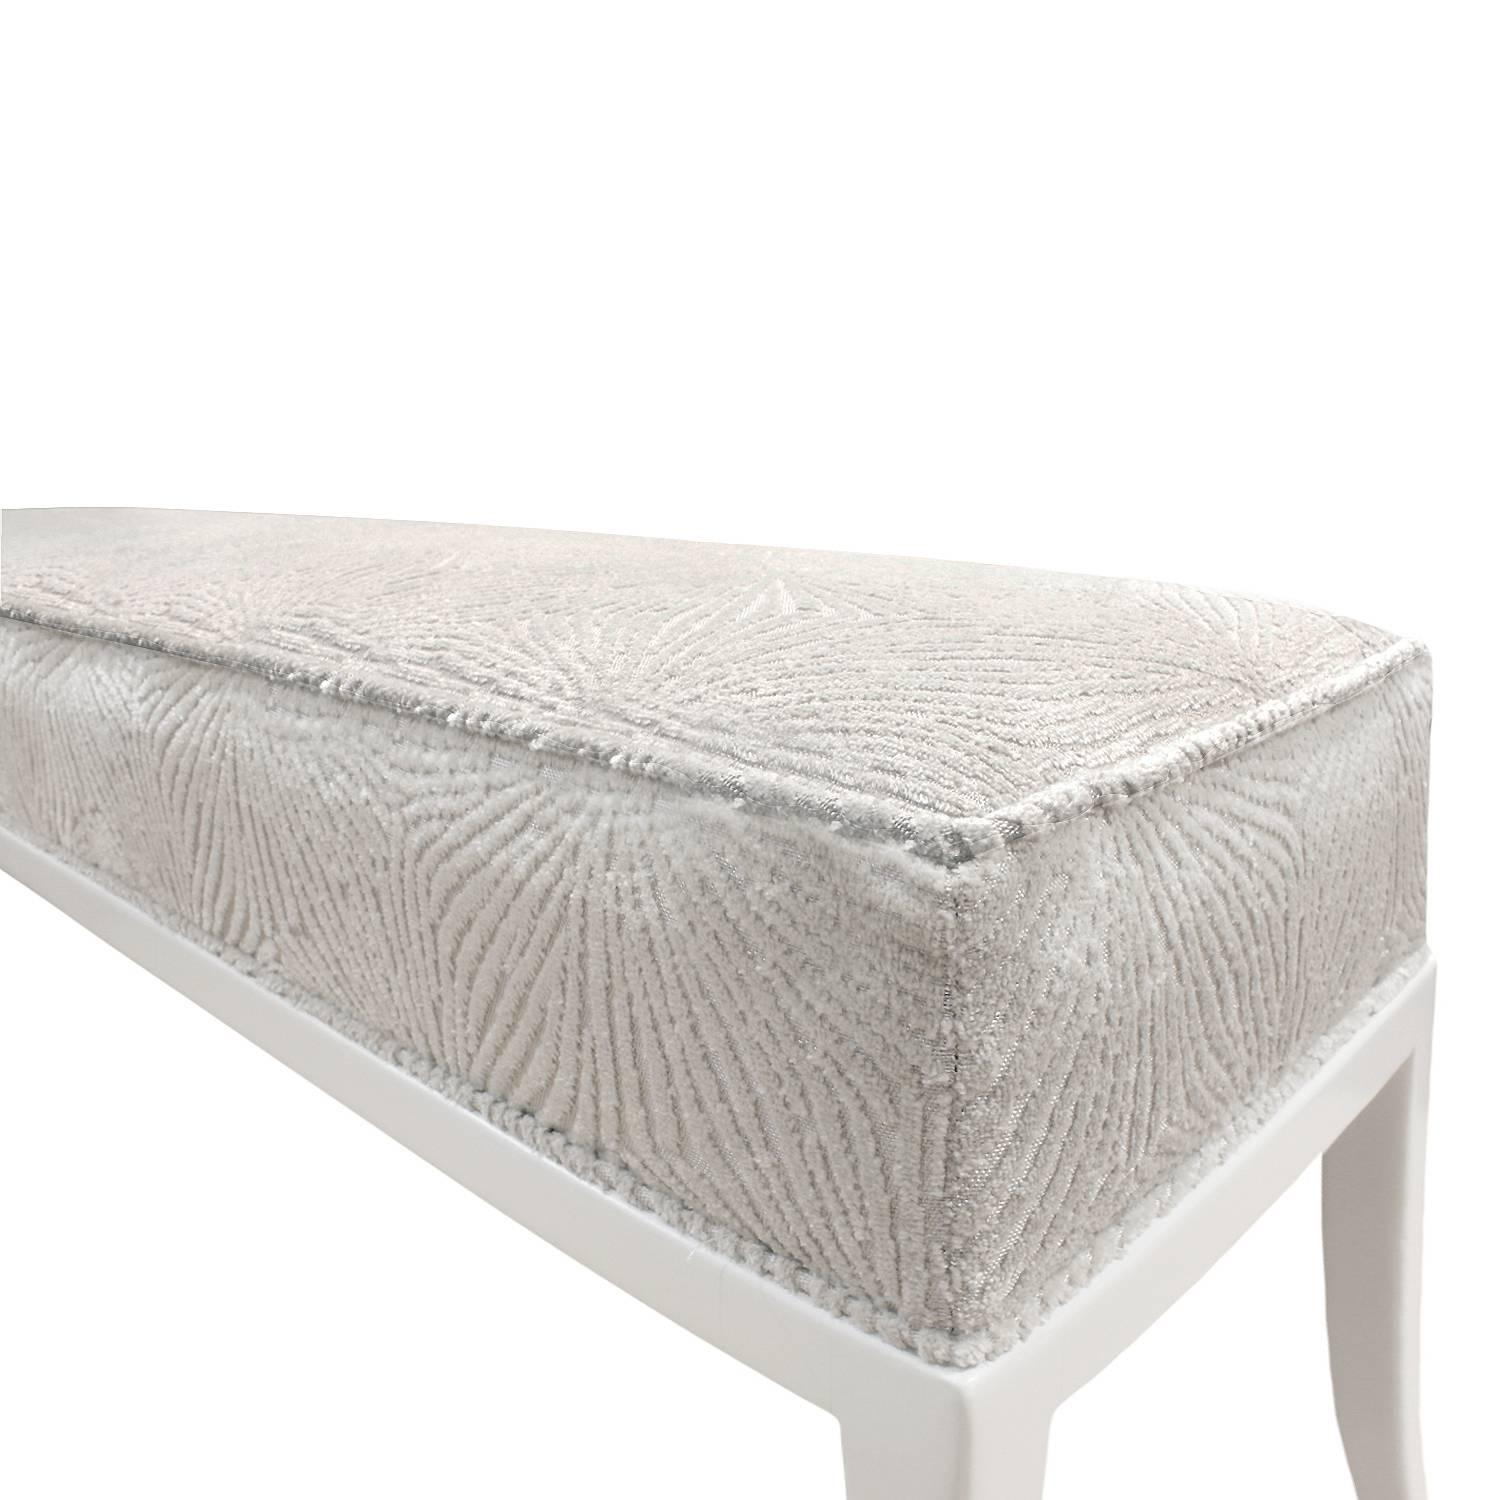 American Tommi Parzinger Graceful Bench with White Lacquer Base, 1950s